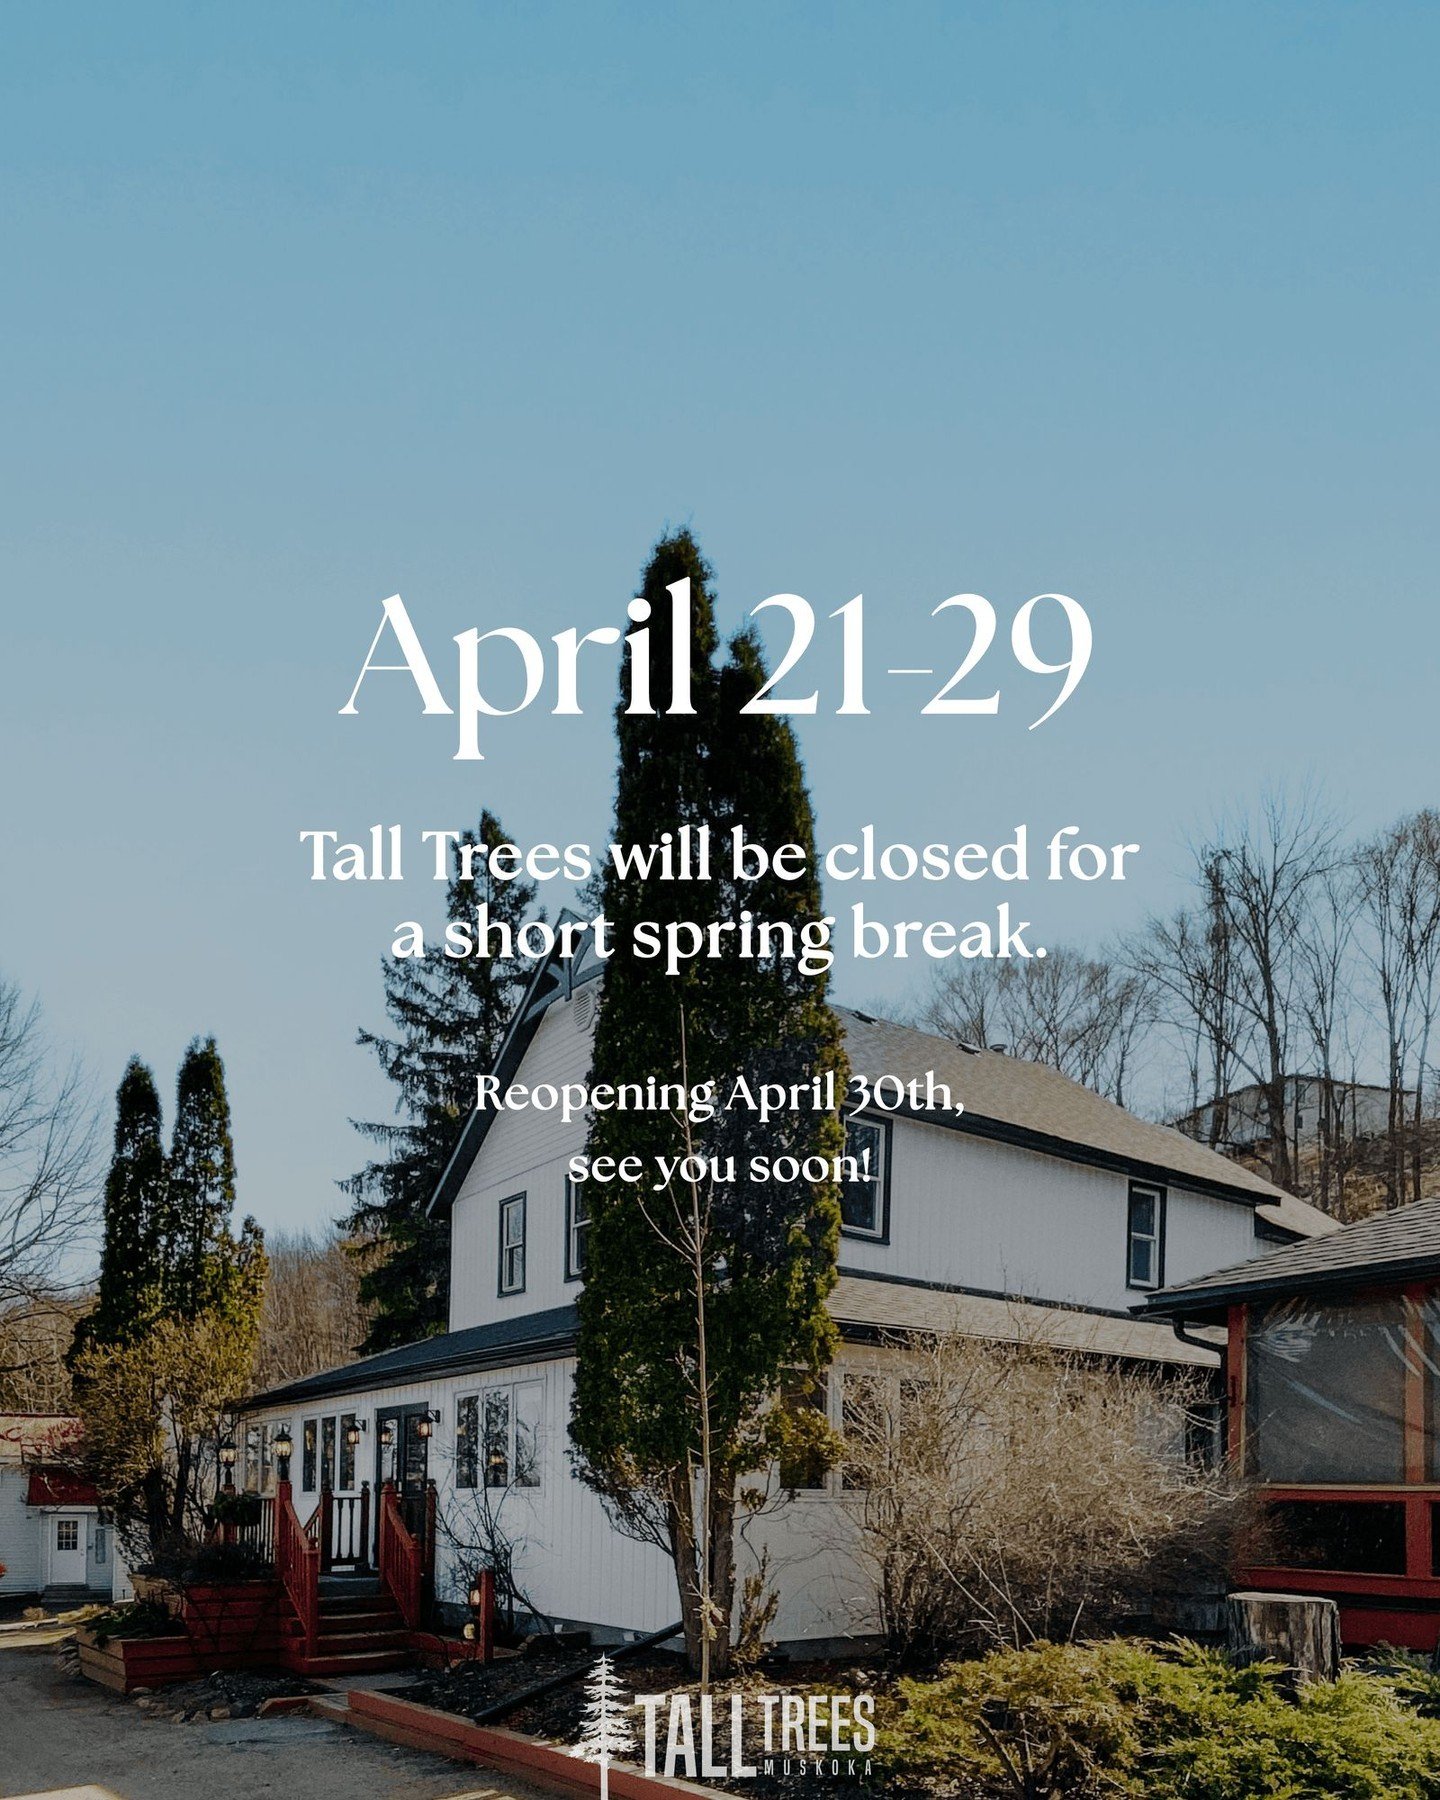 To prepare for the busy summer season ahead, we will be CLOSED until Monday, April 29th and will REOPEN on Tuesday, April 30th! 

See you soon! 

Reserve your table online: Link in bio &uarr; 

📍 Tall Trees is located at 87 Main St W, Huntsville
📲 